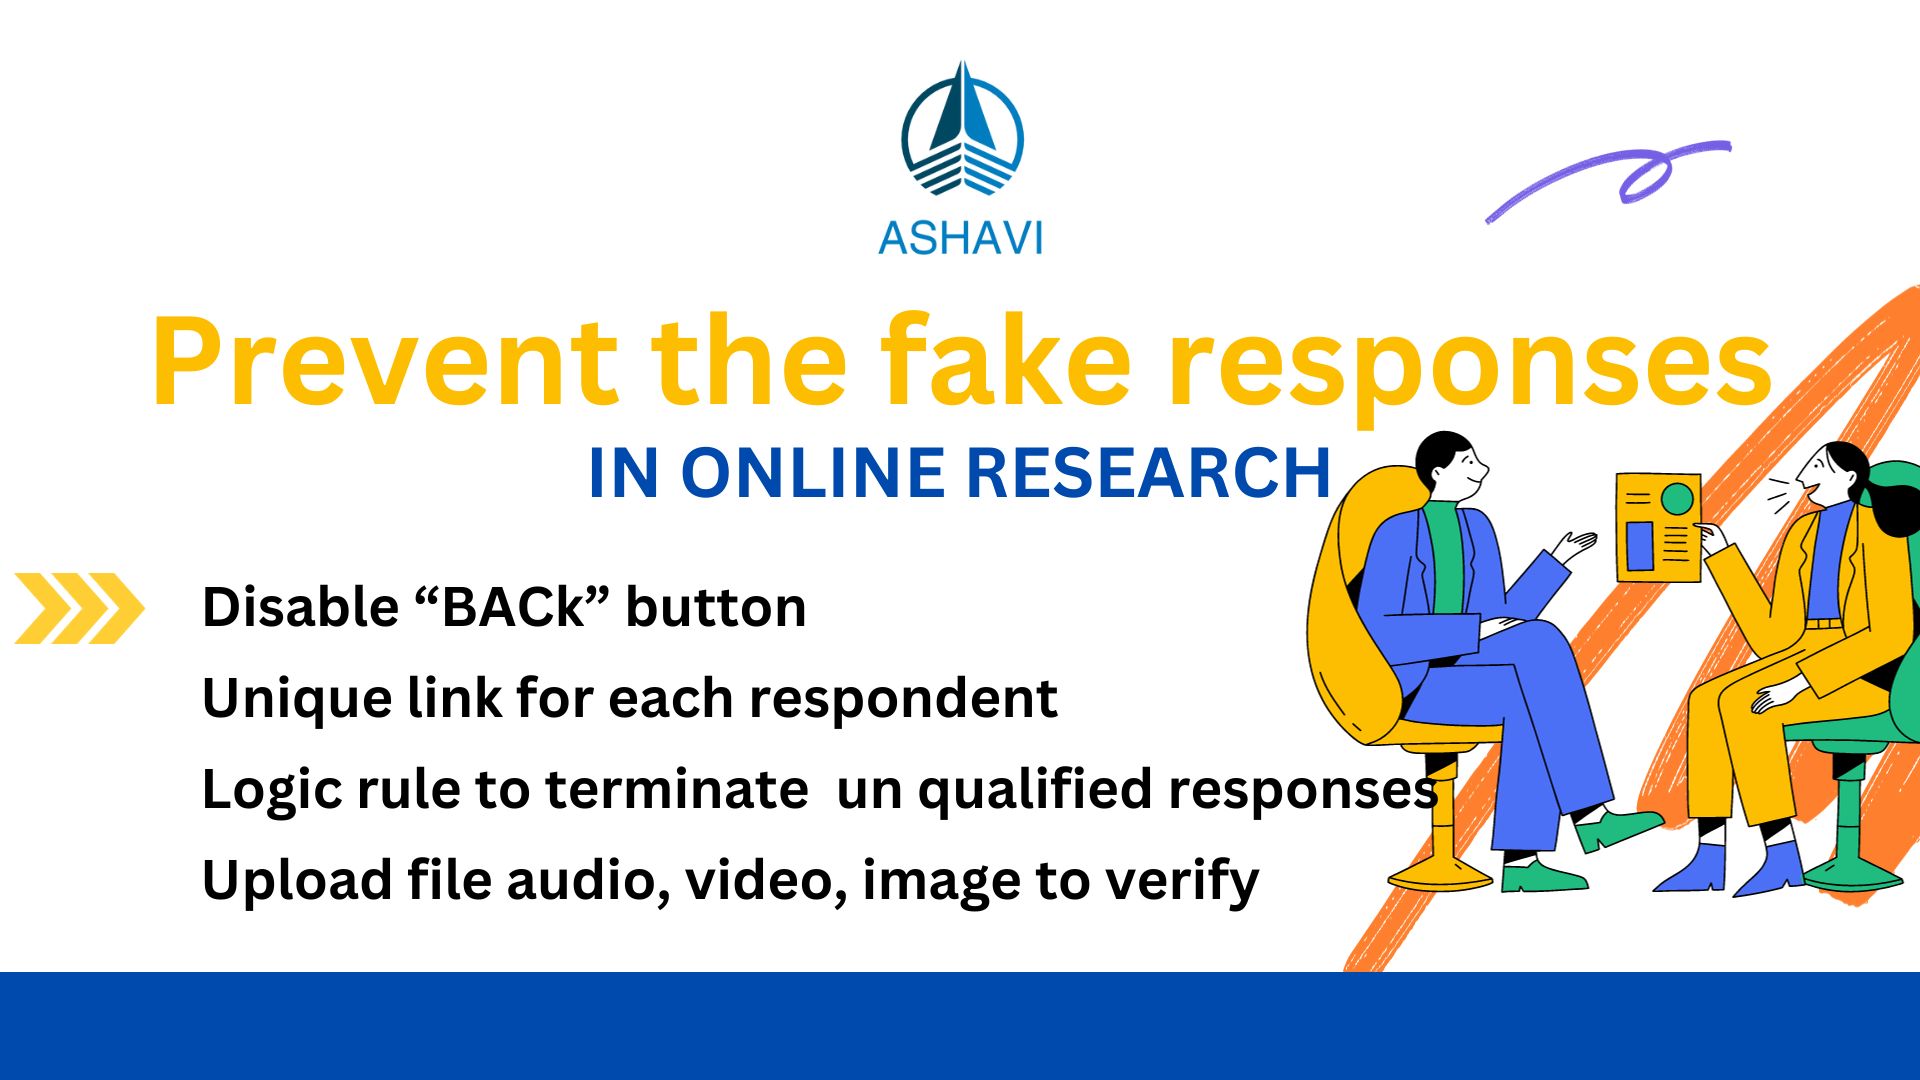 How to prevent the fake respondents answering the fake response for online research